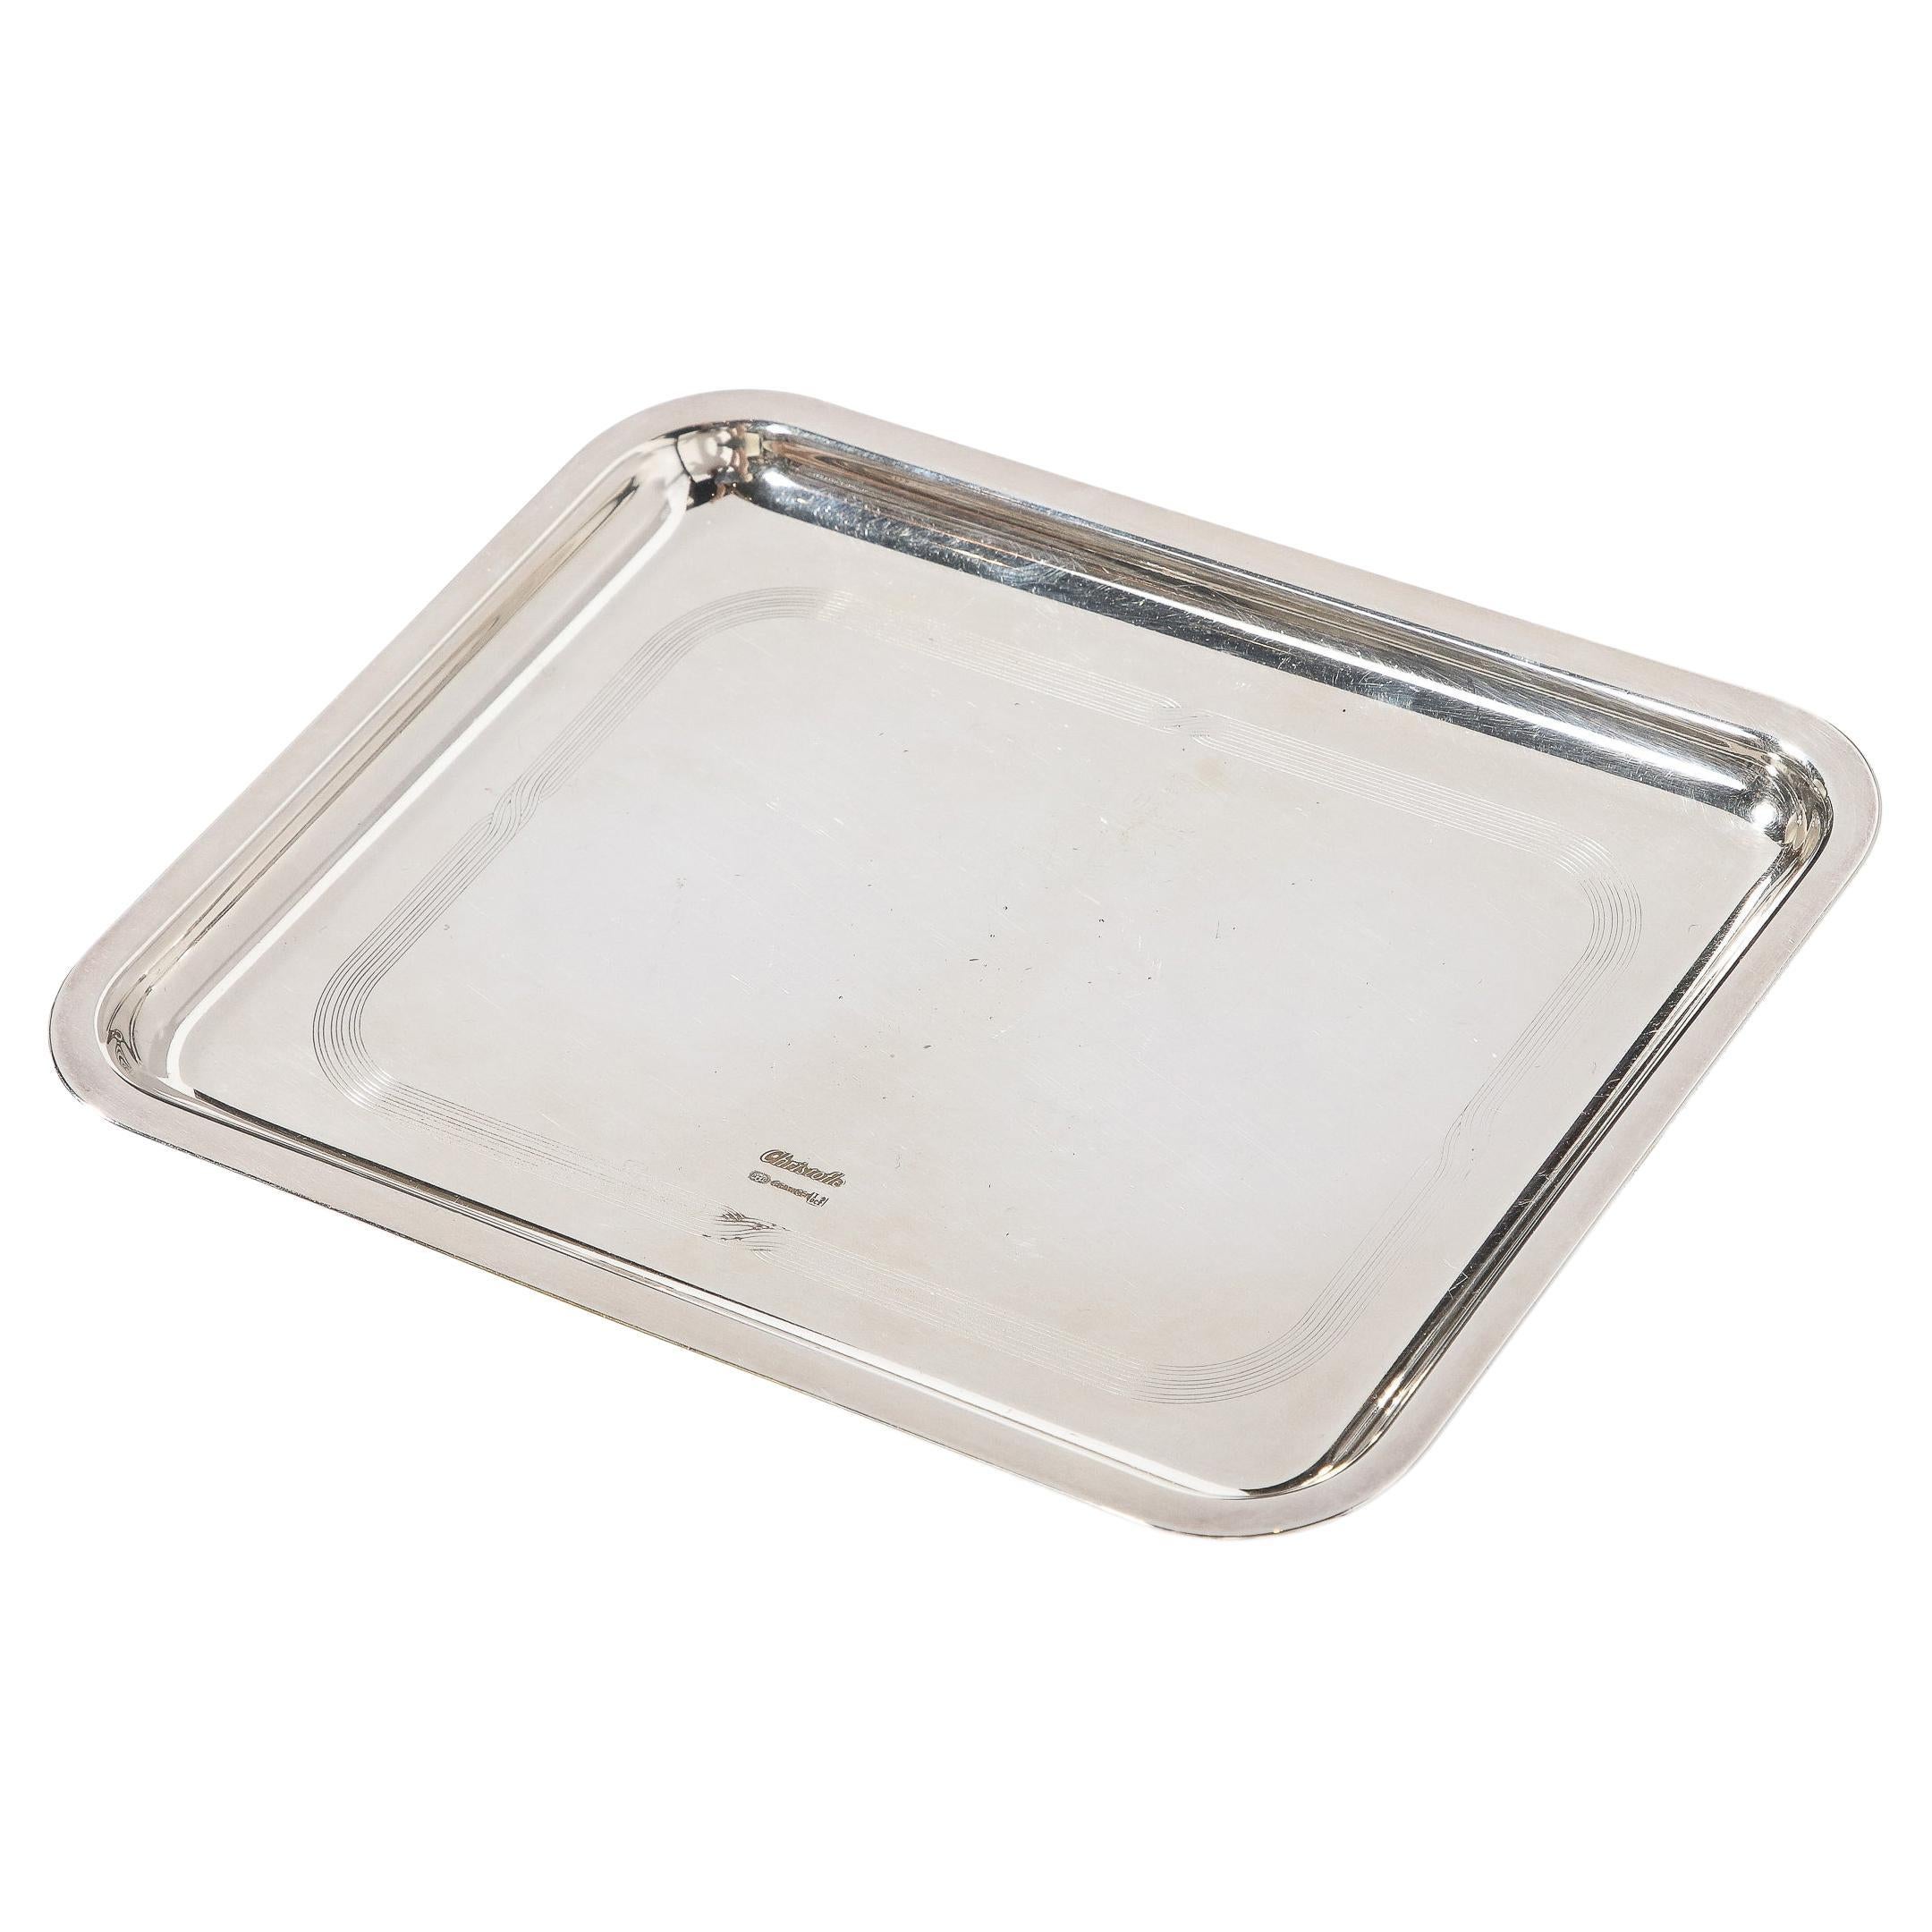 Christofle Silver-Plated Art Deco Style Tray with Engine Turned Engraving